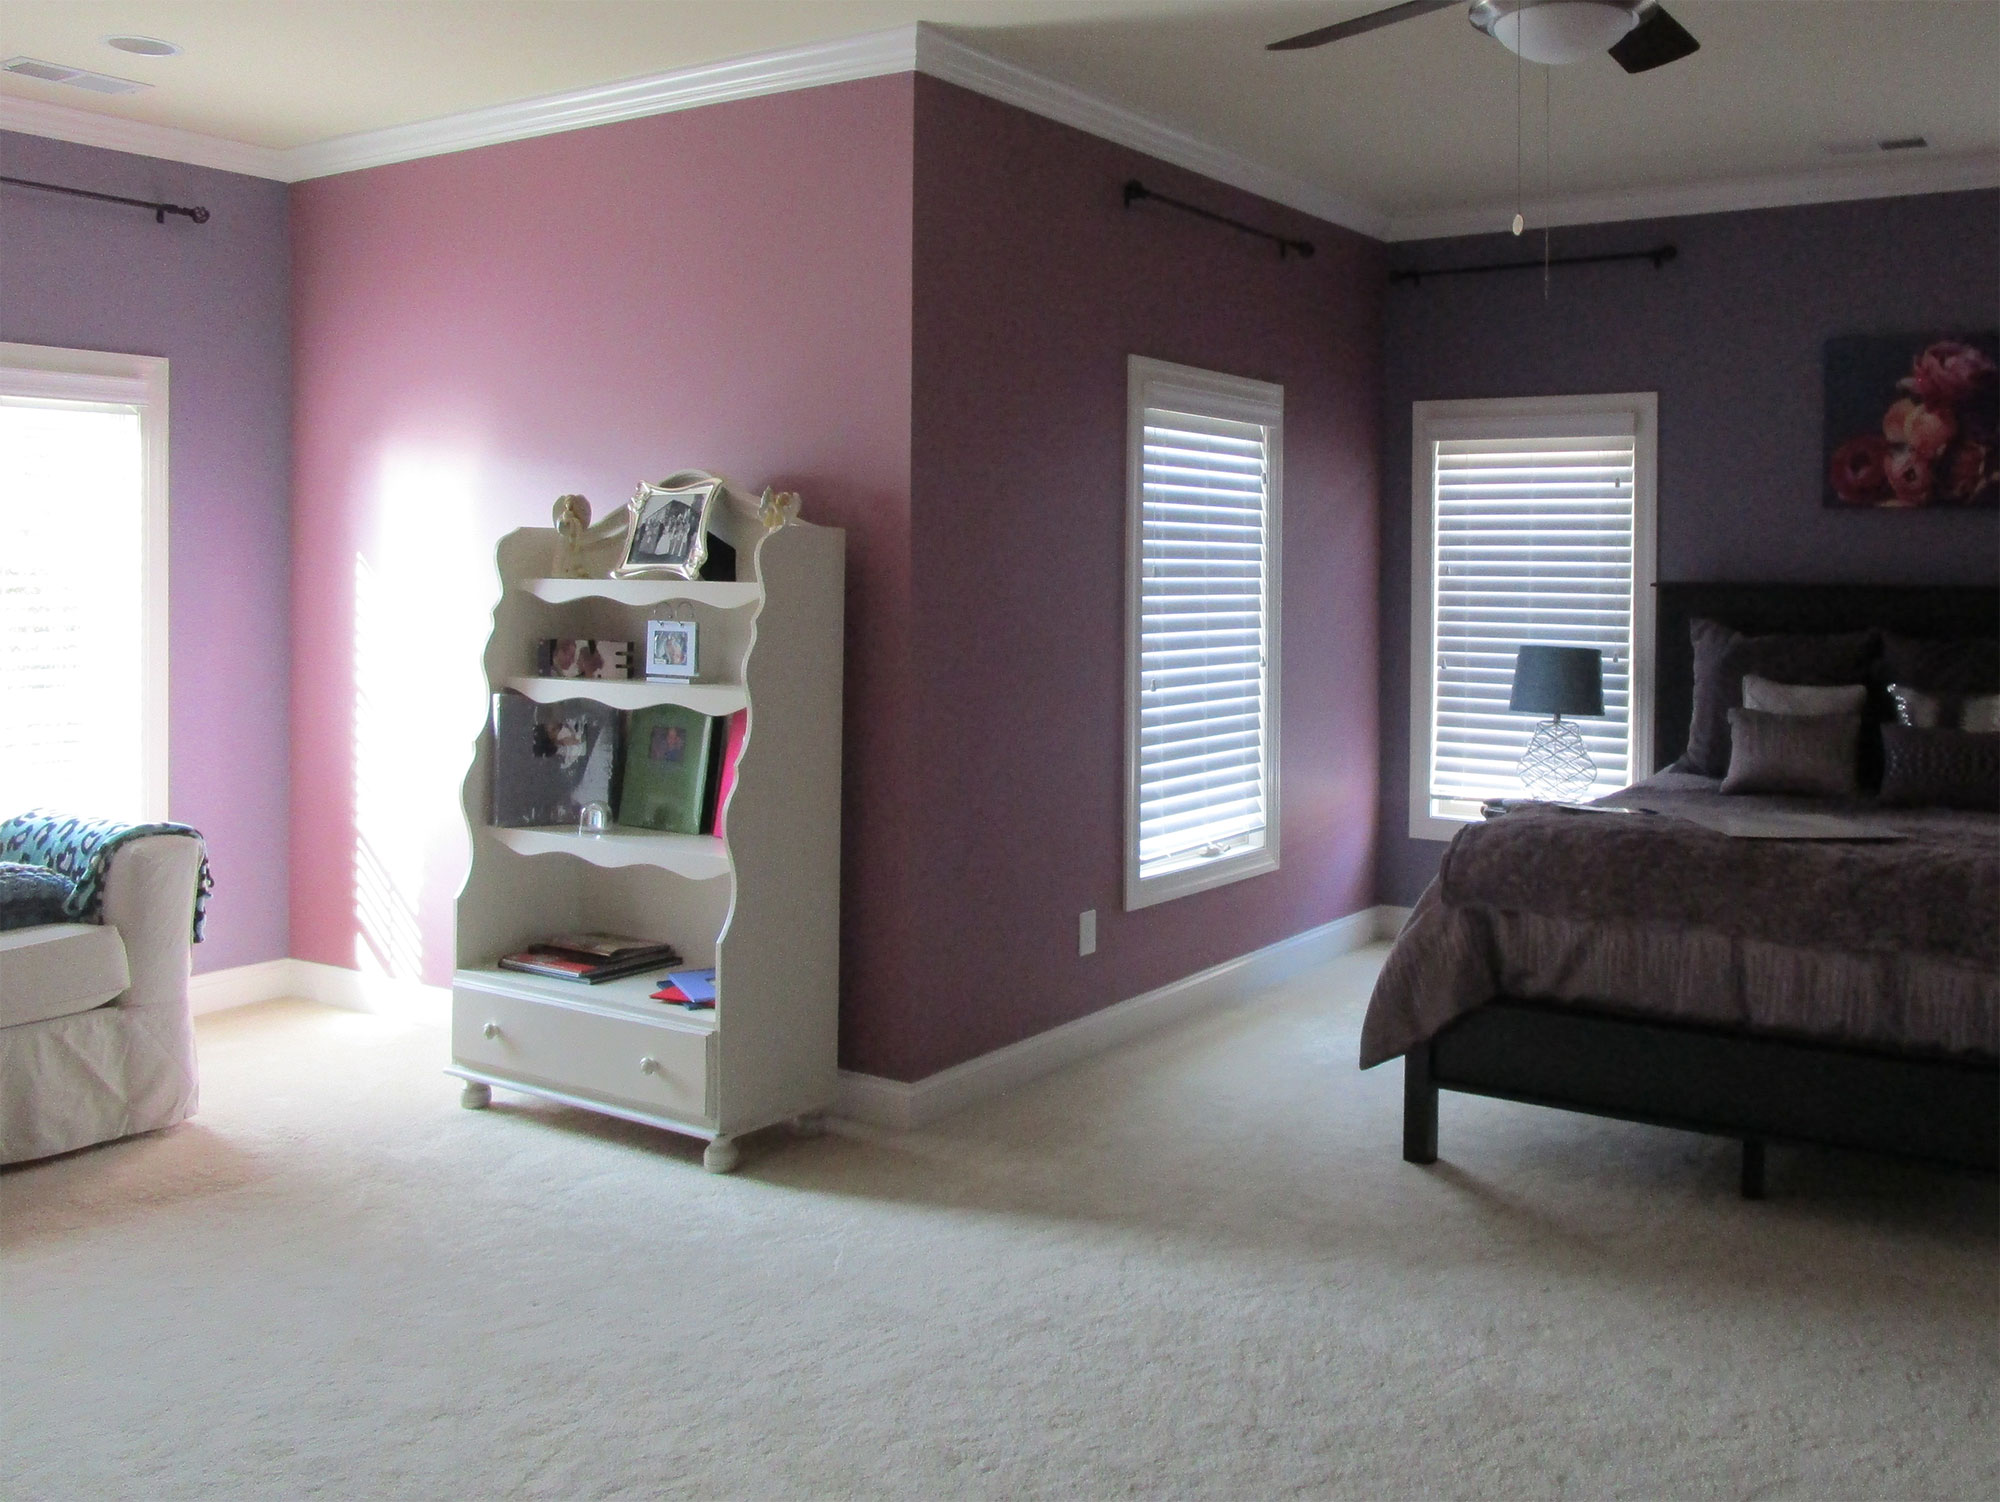 Bedroom Project in Waxhaw, NC After